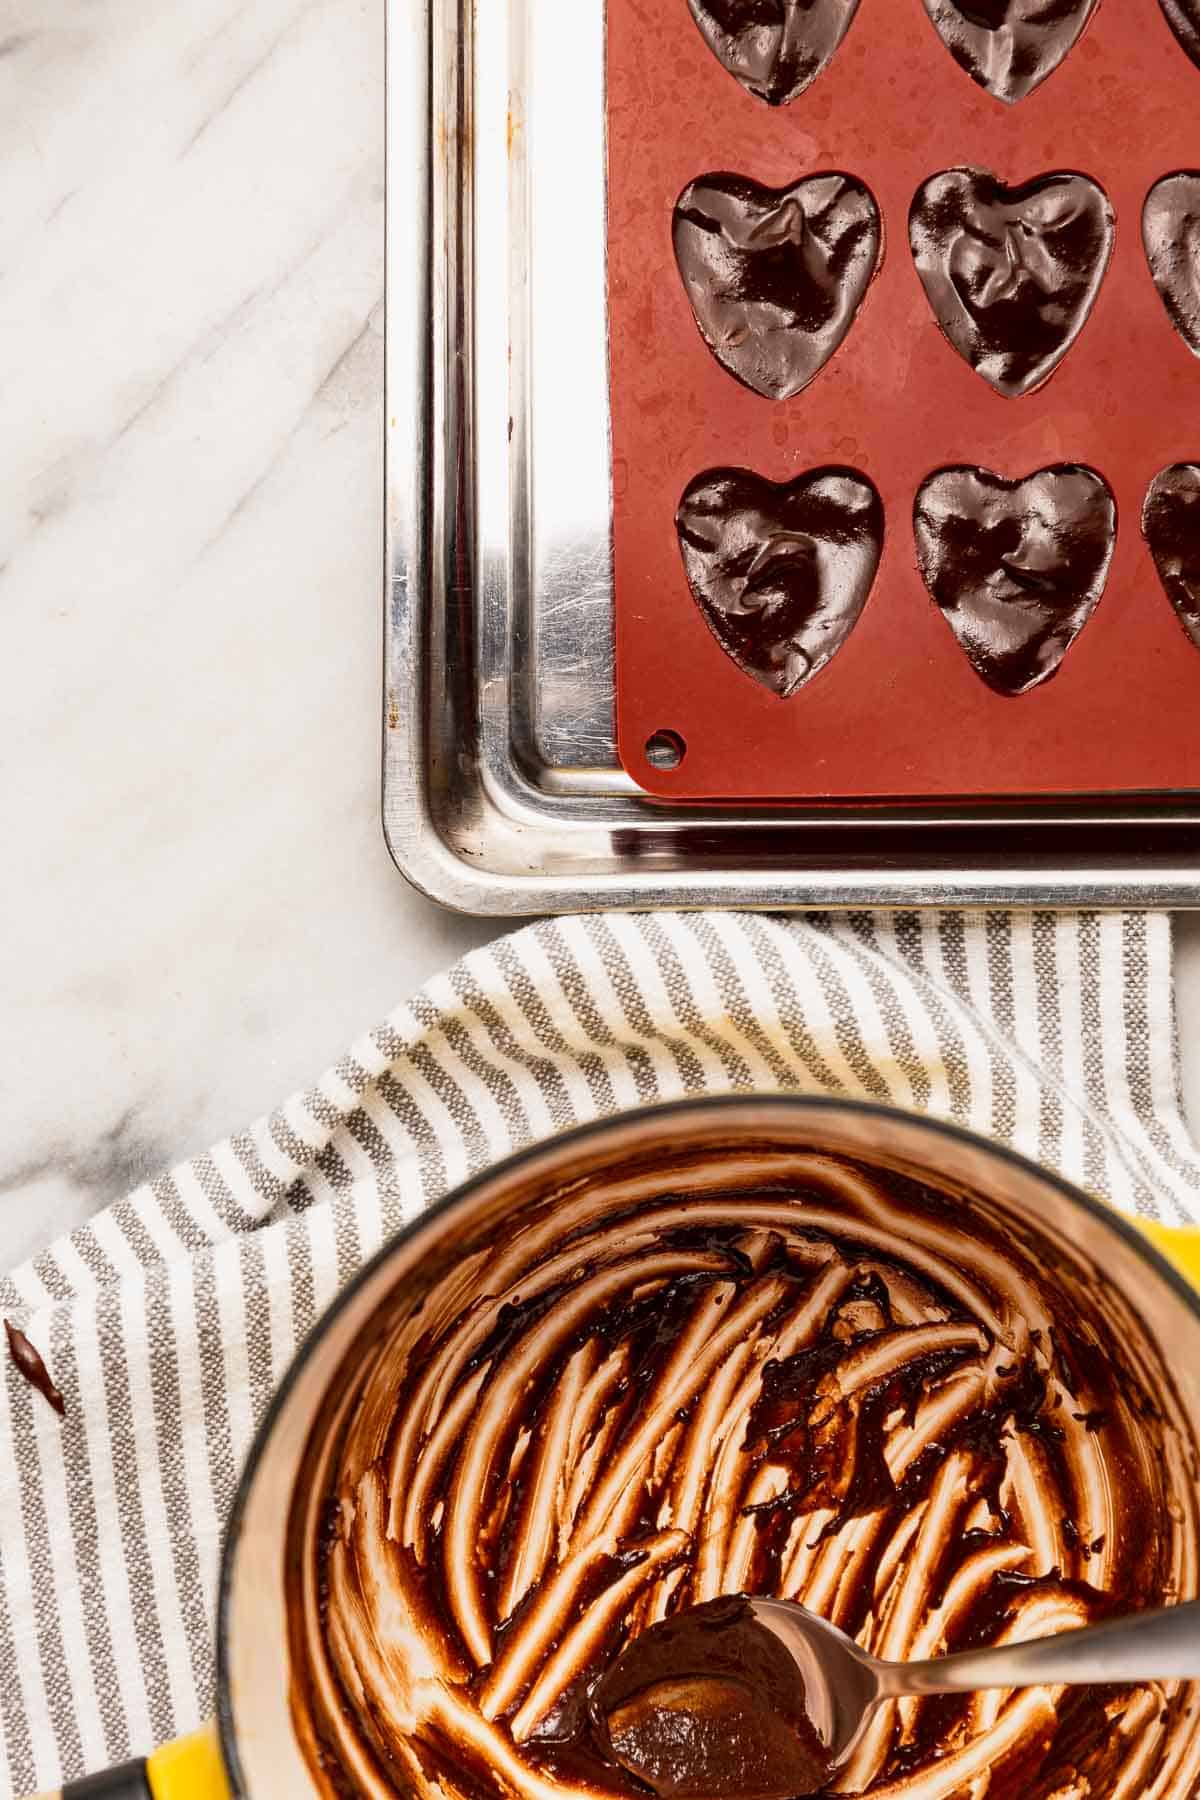 Heart-shaped candy molds filled with chocolate rosemary truffles.